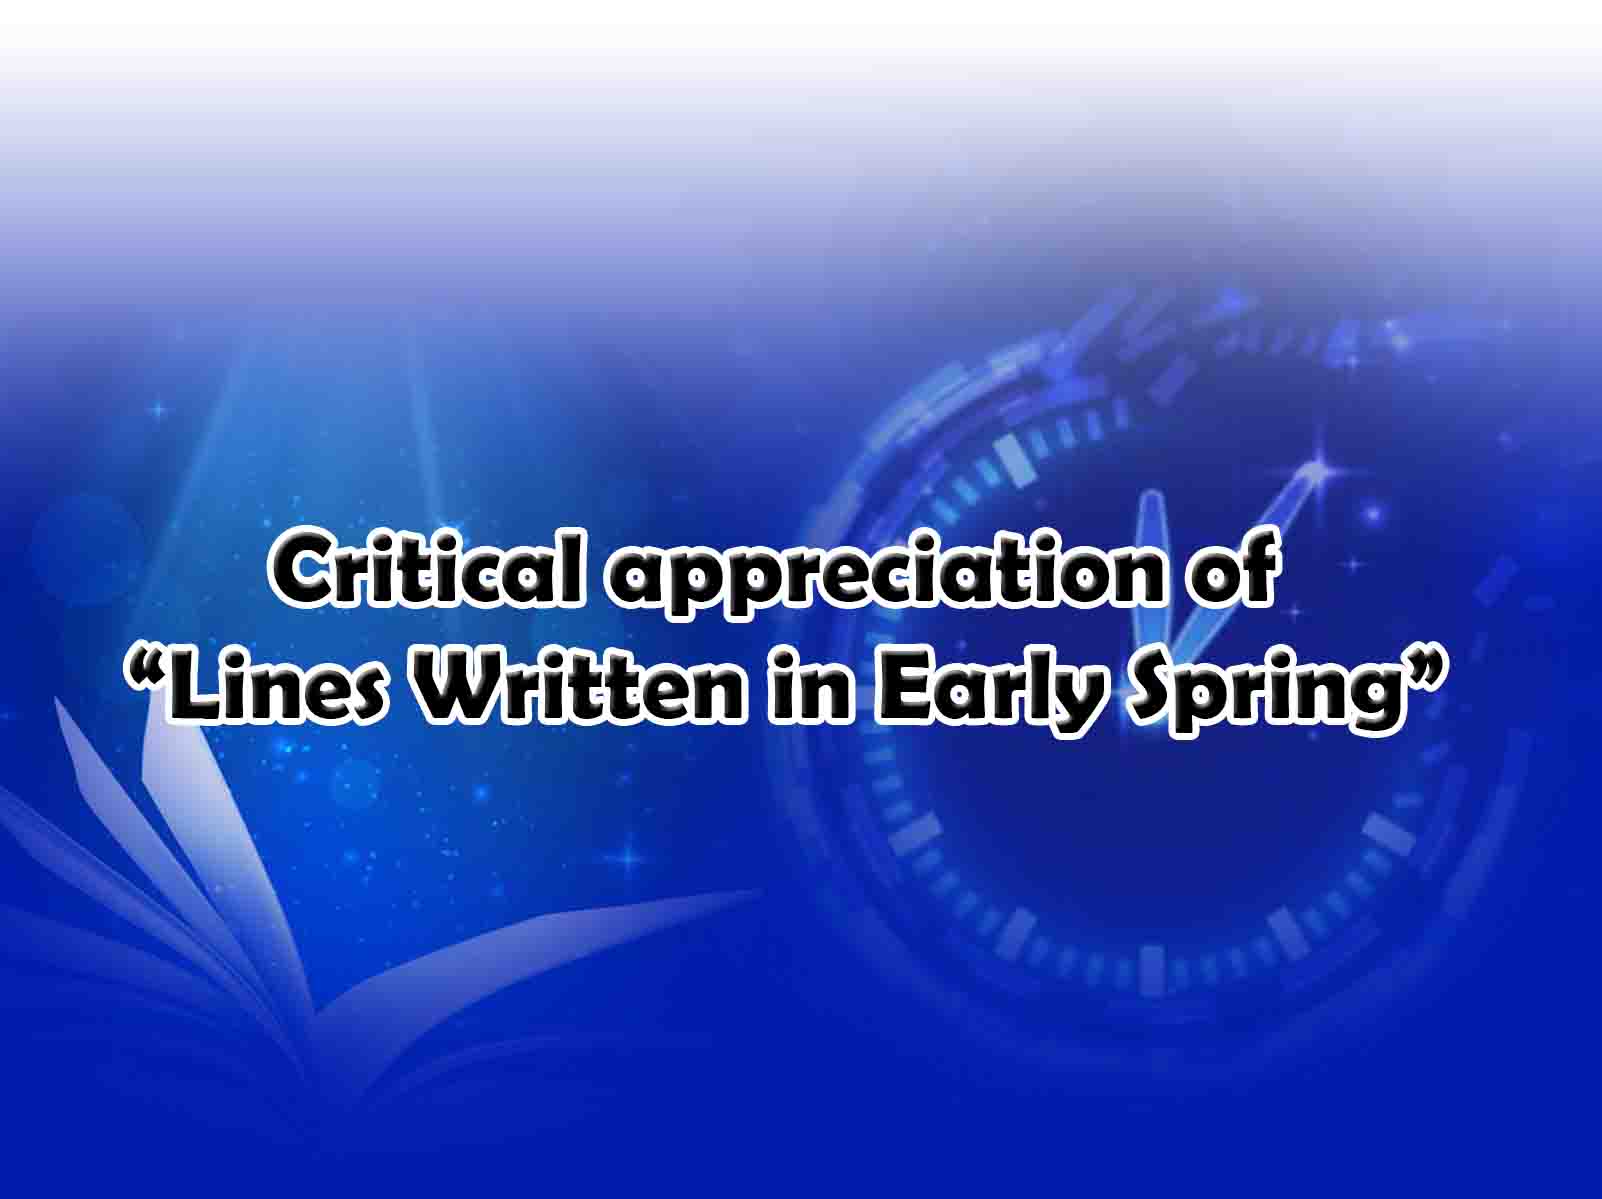 Critical appreciation of Lines Written in Early Spring